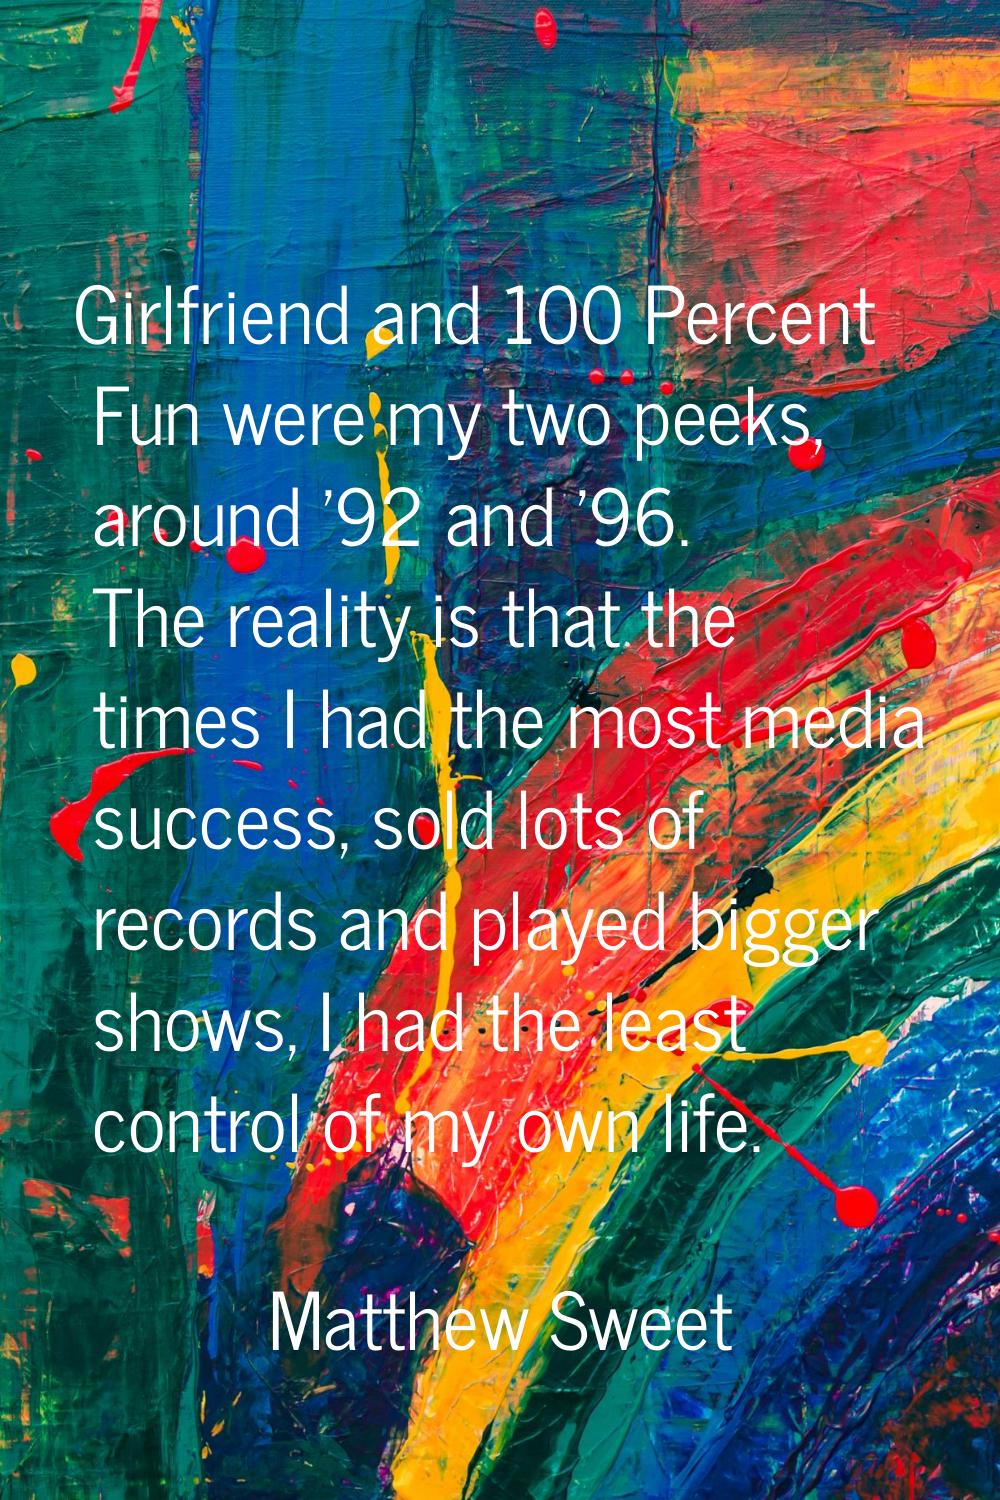 Girlfriend and 100 Percent Fun were my two peeks, around '92 and '96. The reality is that the times